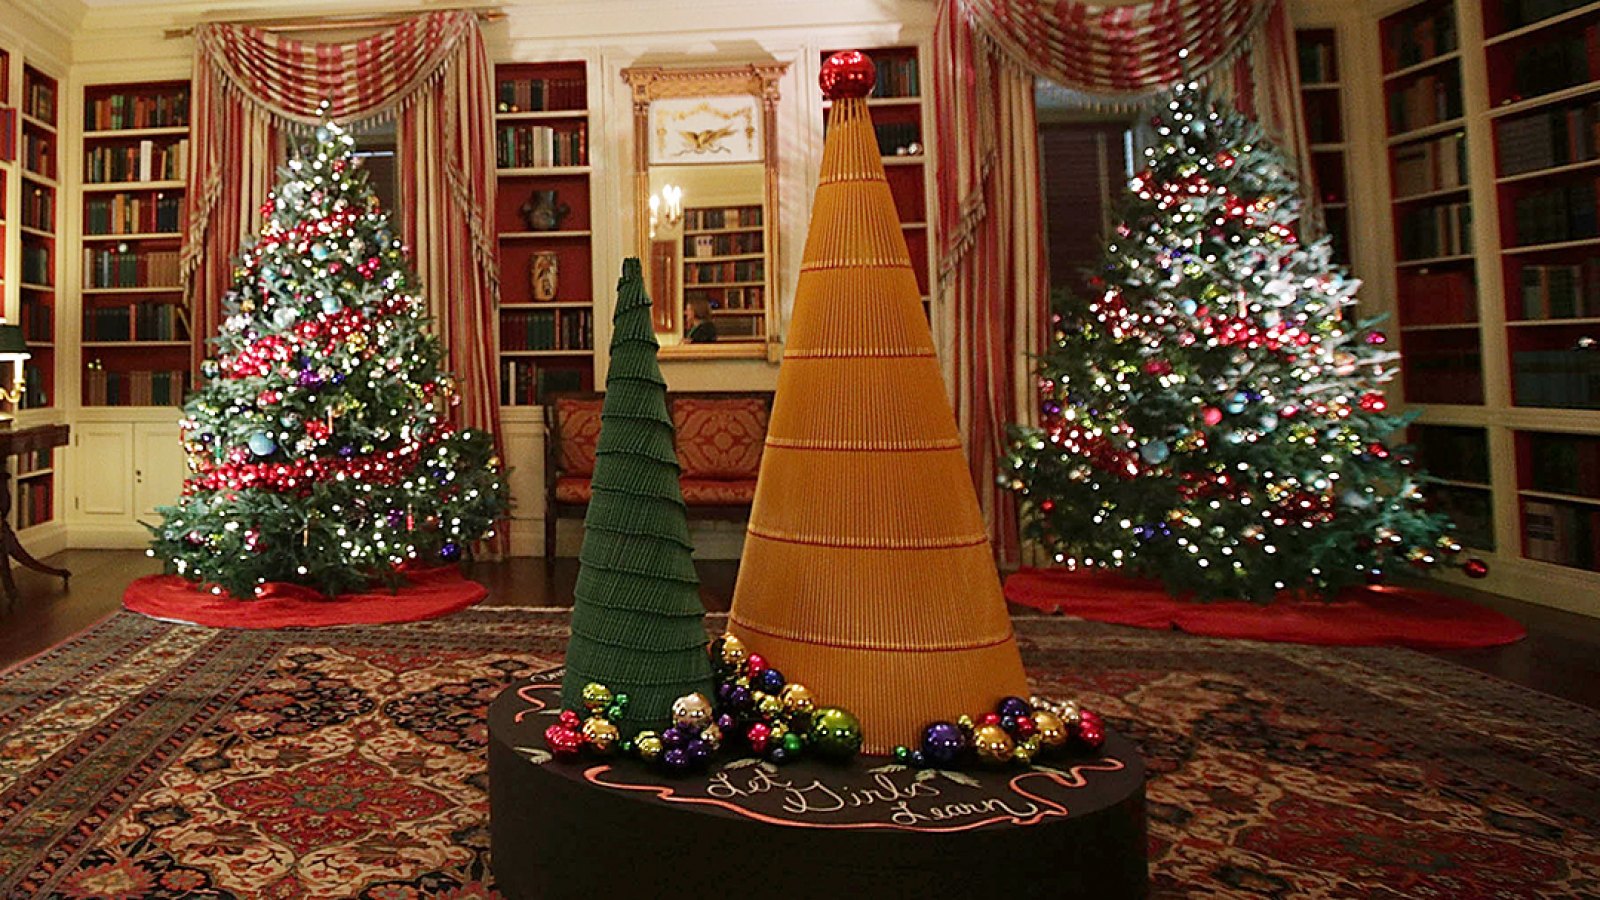 White House Christmas tree decorations